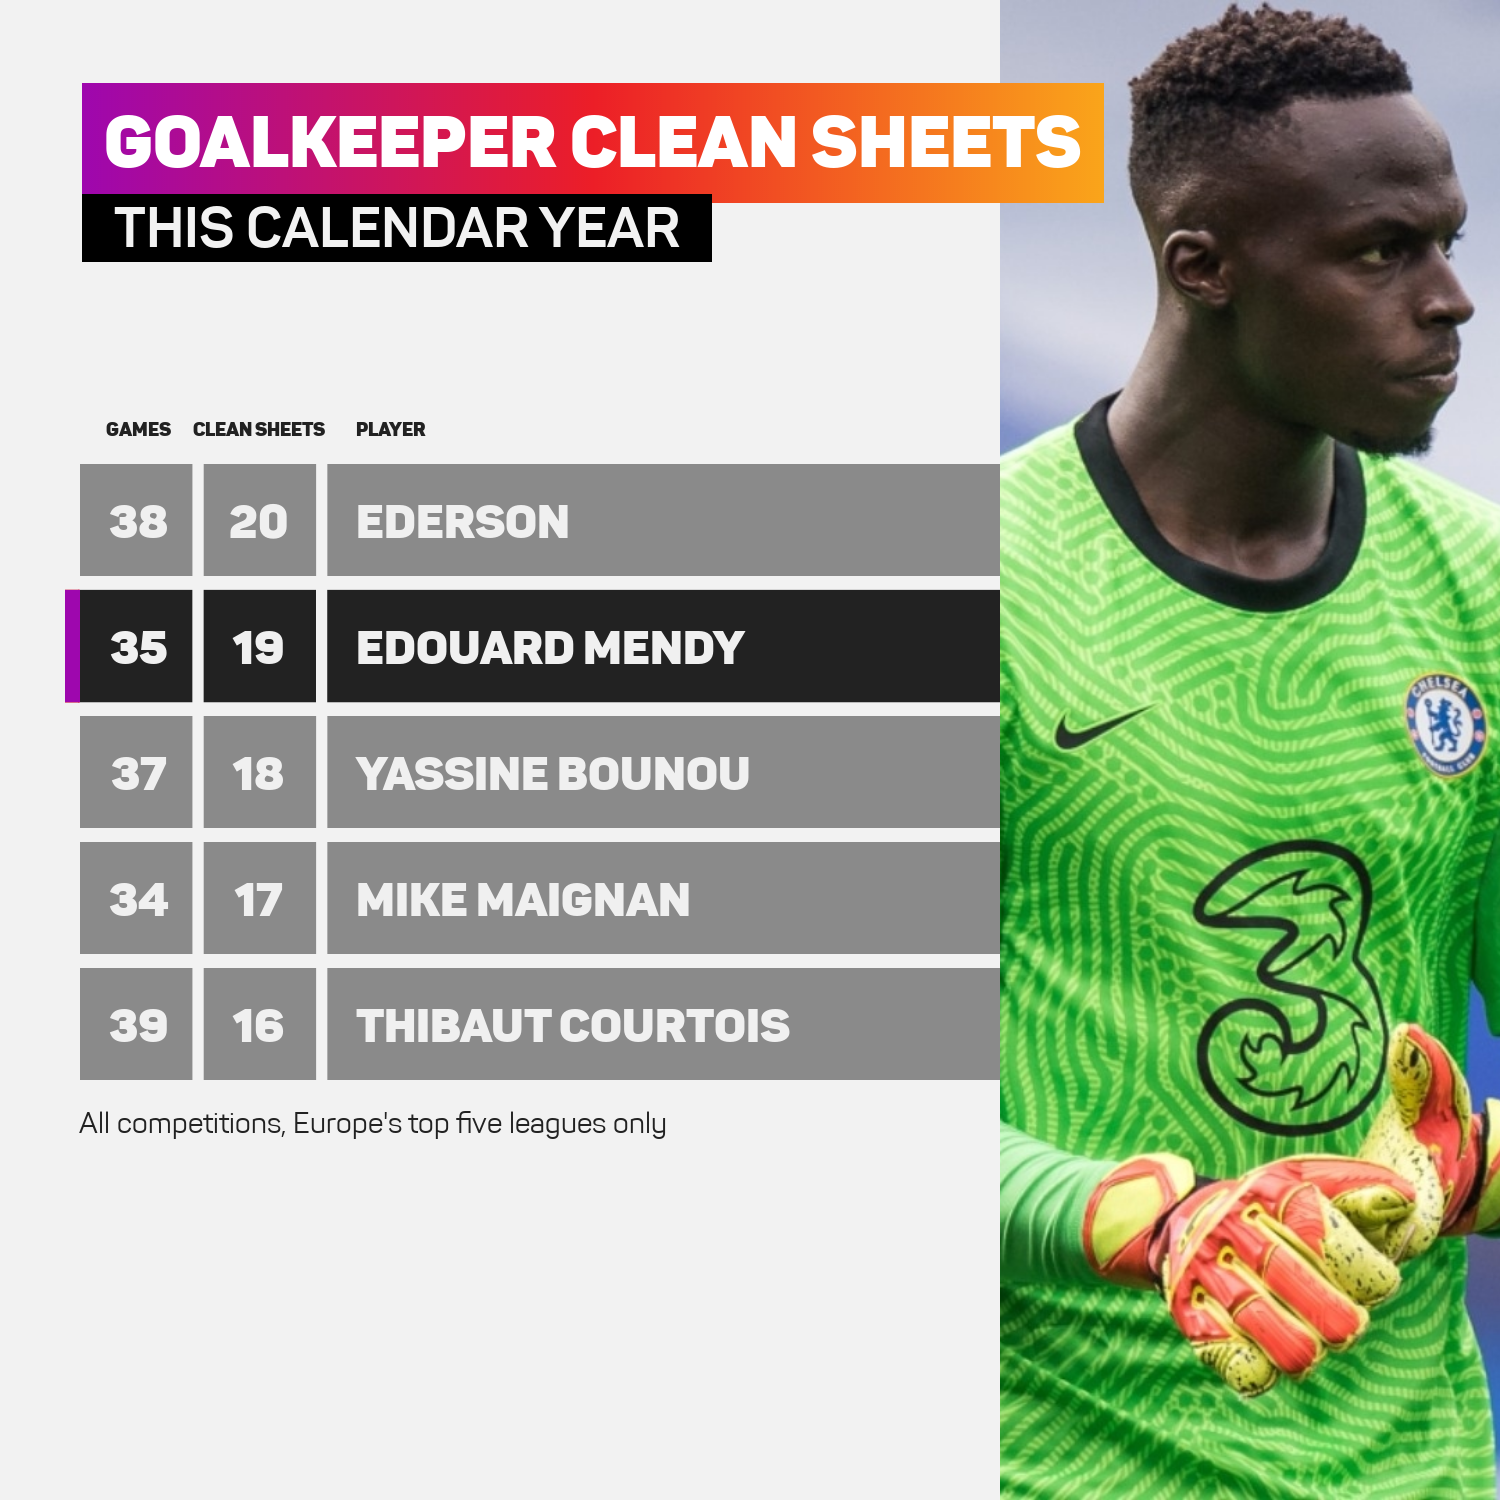 Edouard Mendy has kept 19 clean sheets for Chelsea in 2021